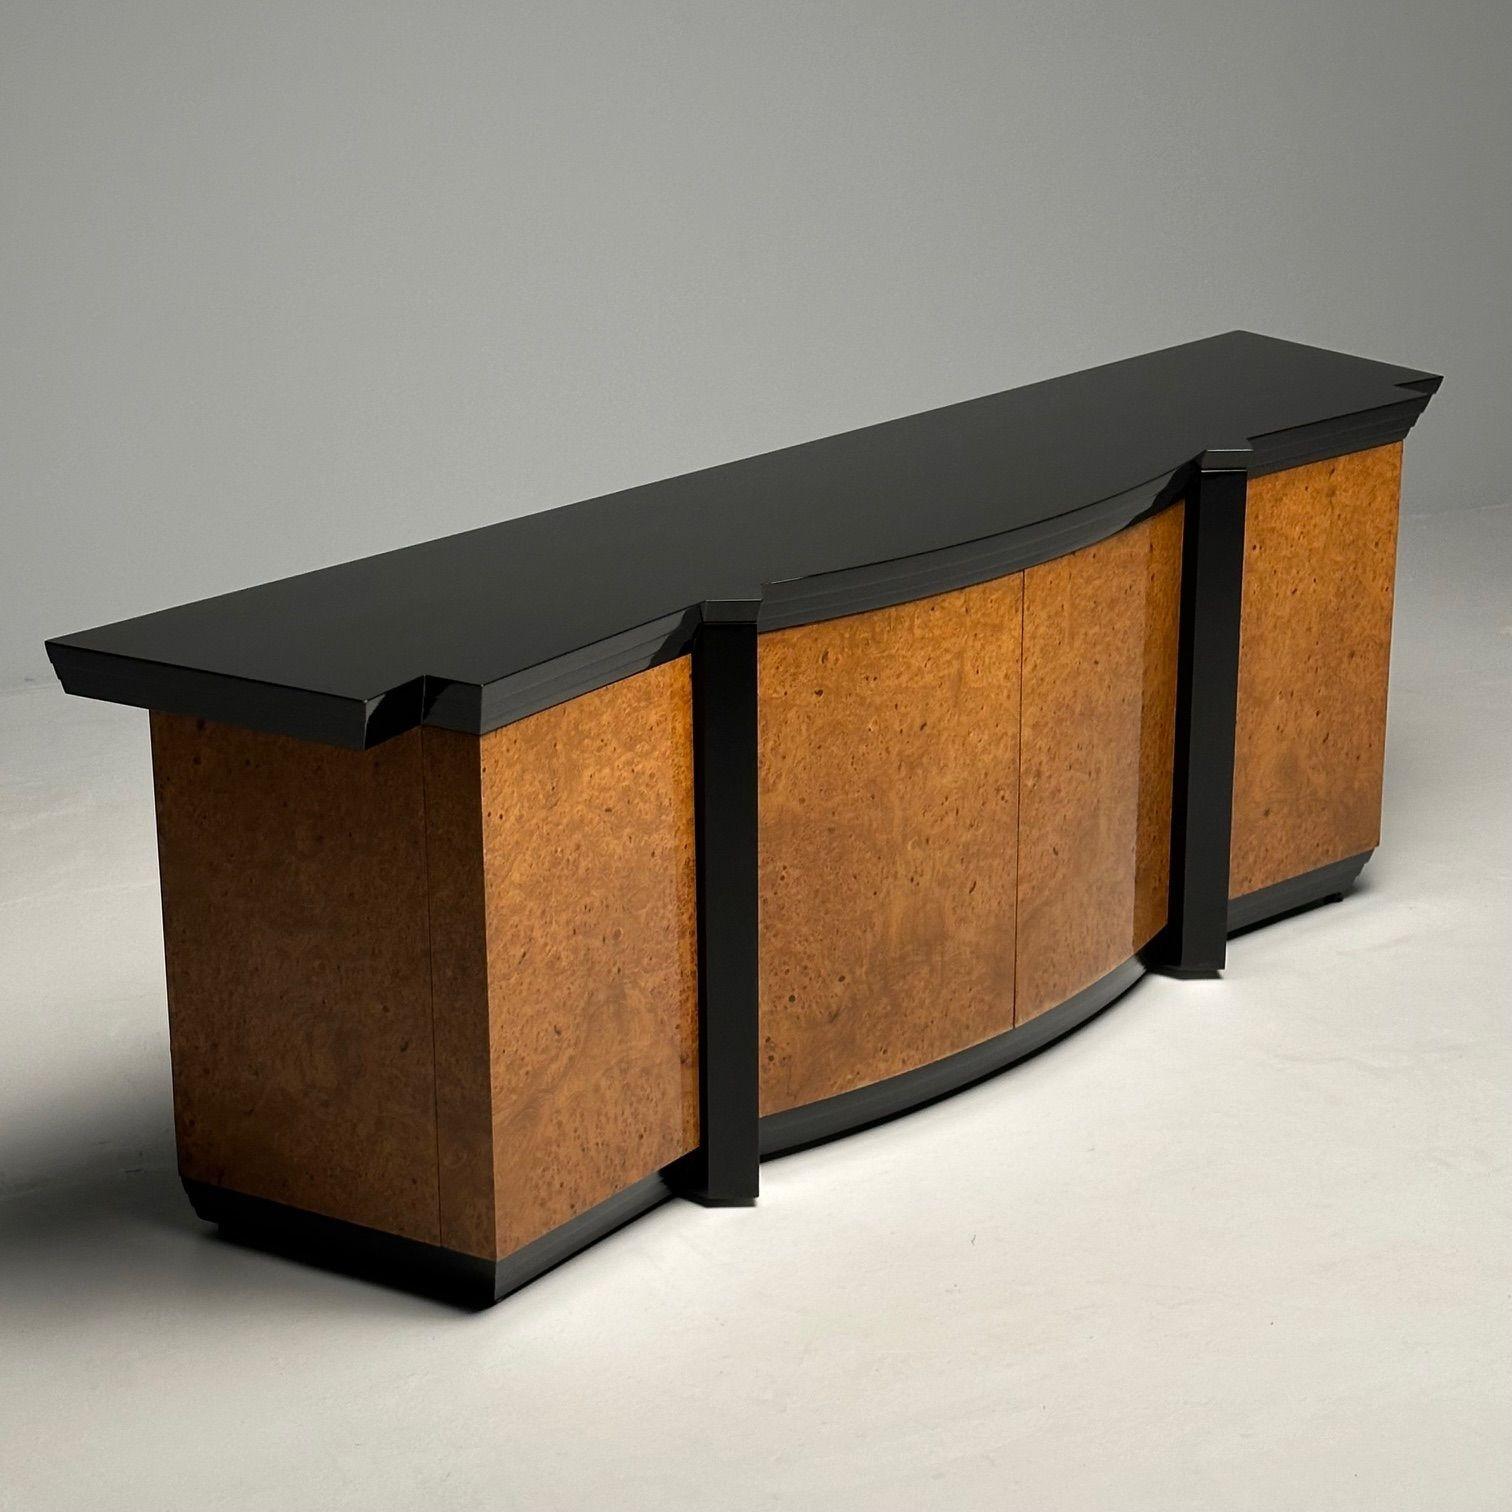 Vladimir Kagan (American, 1927-2016) Eva Dining Room Set, Vladimir Kagan Designs, Inc., USA, circa 1983

The sideboard (Model 83-210) comprising a center bow front section of two doors having a fitted interior, containing one shelf and one drawer